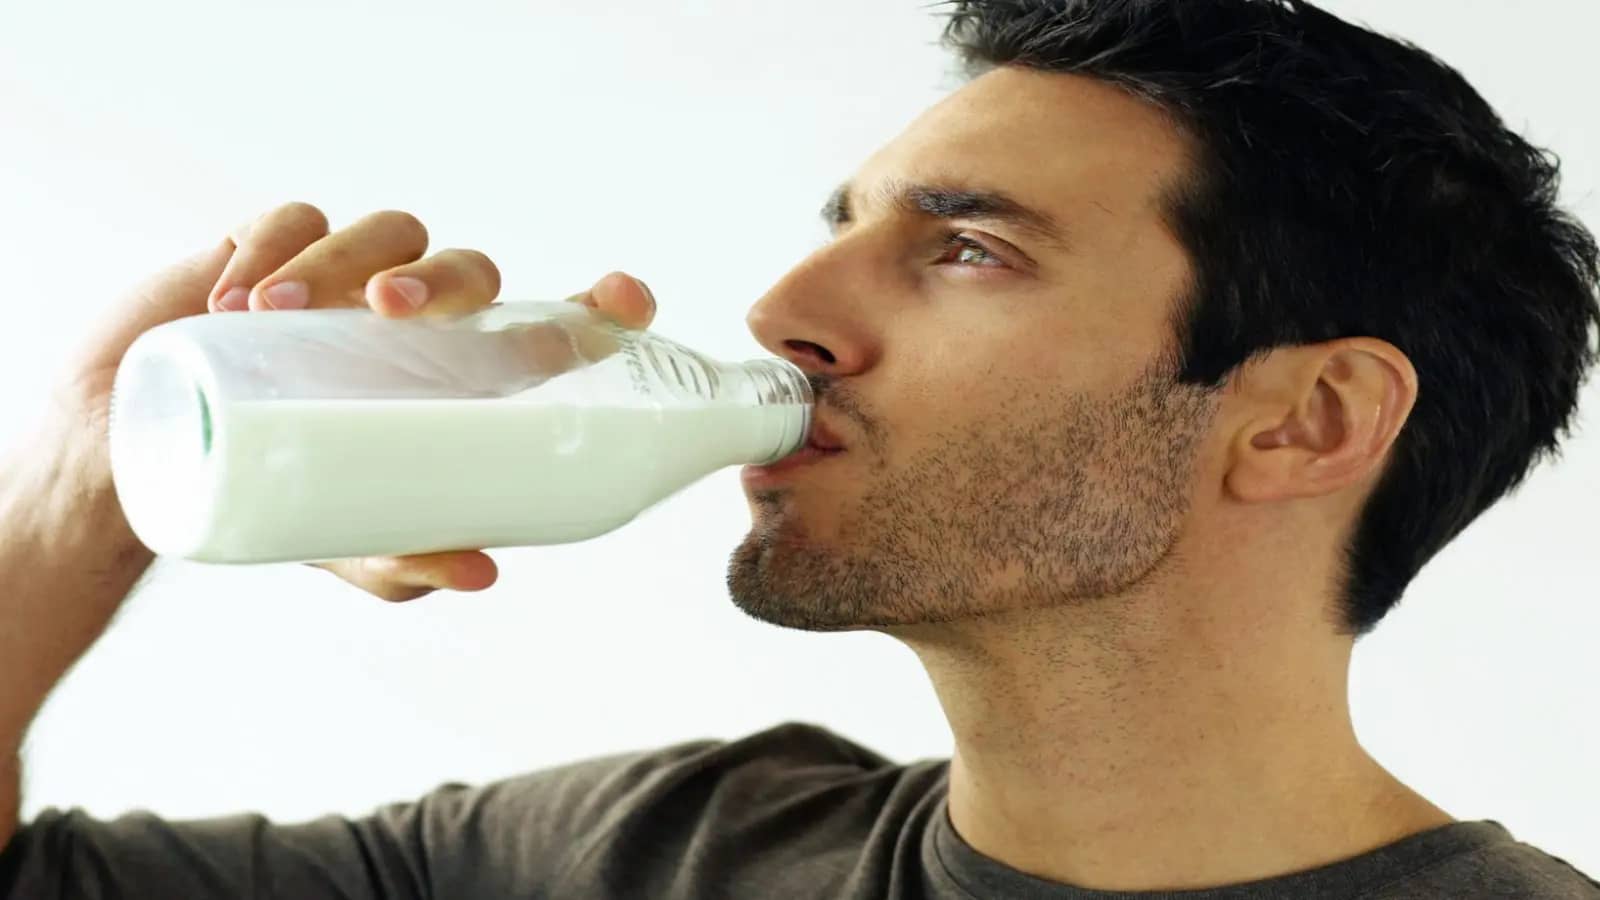 New research associates dairy products intake with increased cancer risk